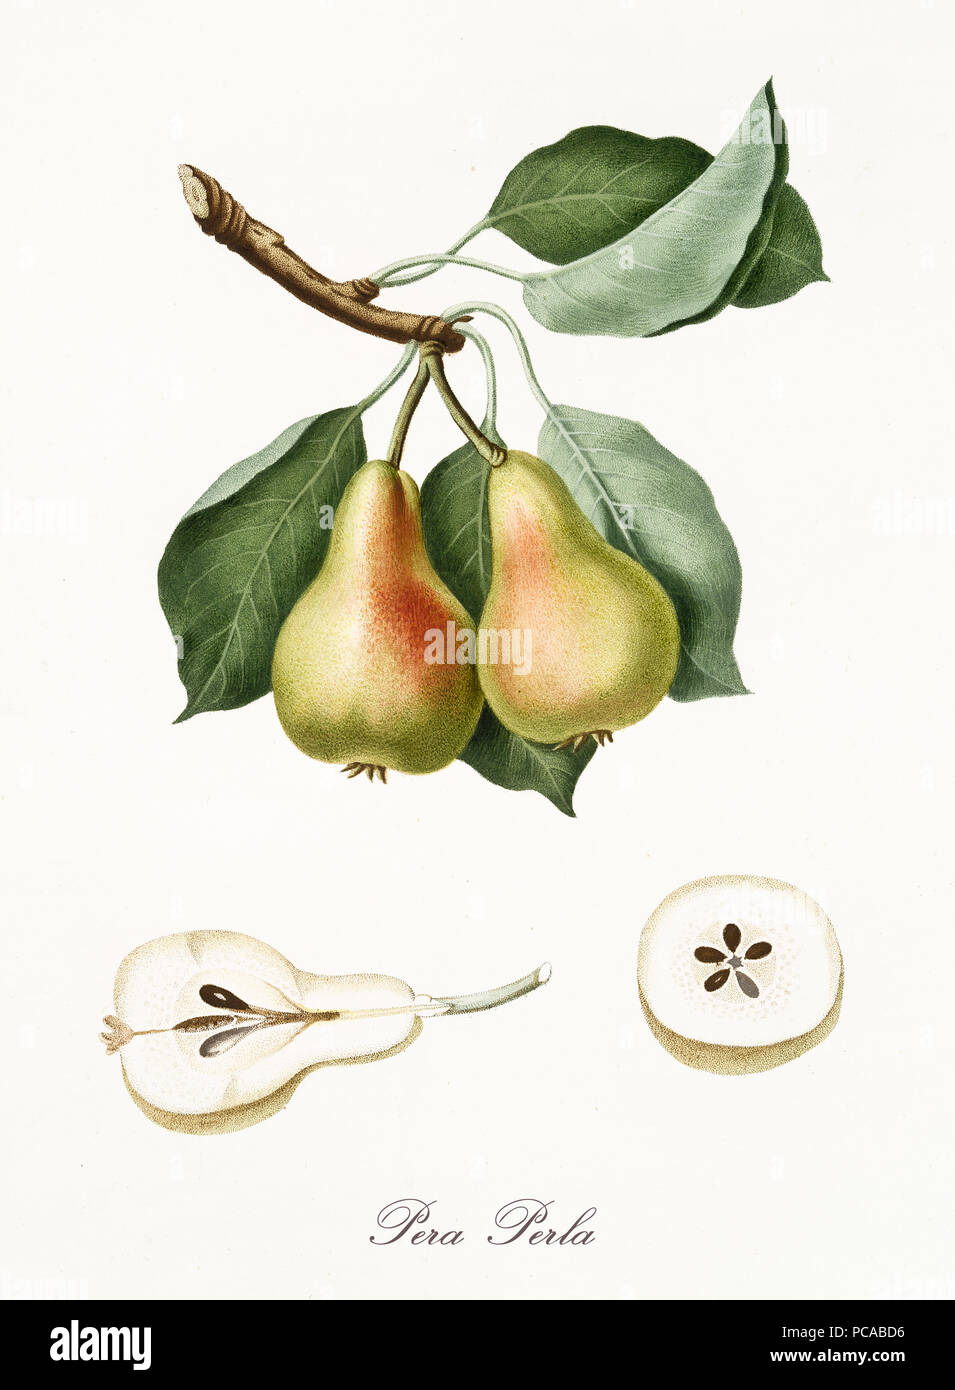 Pear, also known as Pearl Pear, pear tree leaves, and pear section isolated on white background. Old botanical detailed watercolor illustration By Giorgio Gallesio publ. 1817, 1839 Pisa Italy. Stock Photo